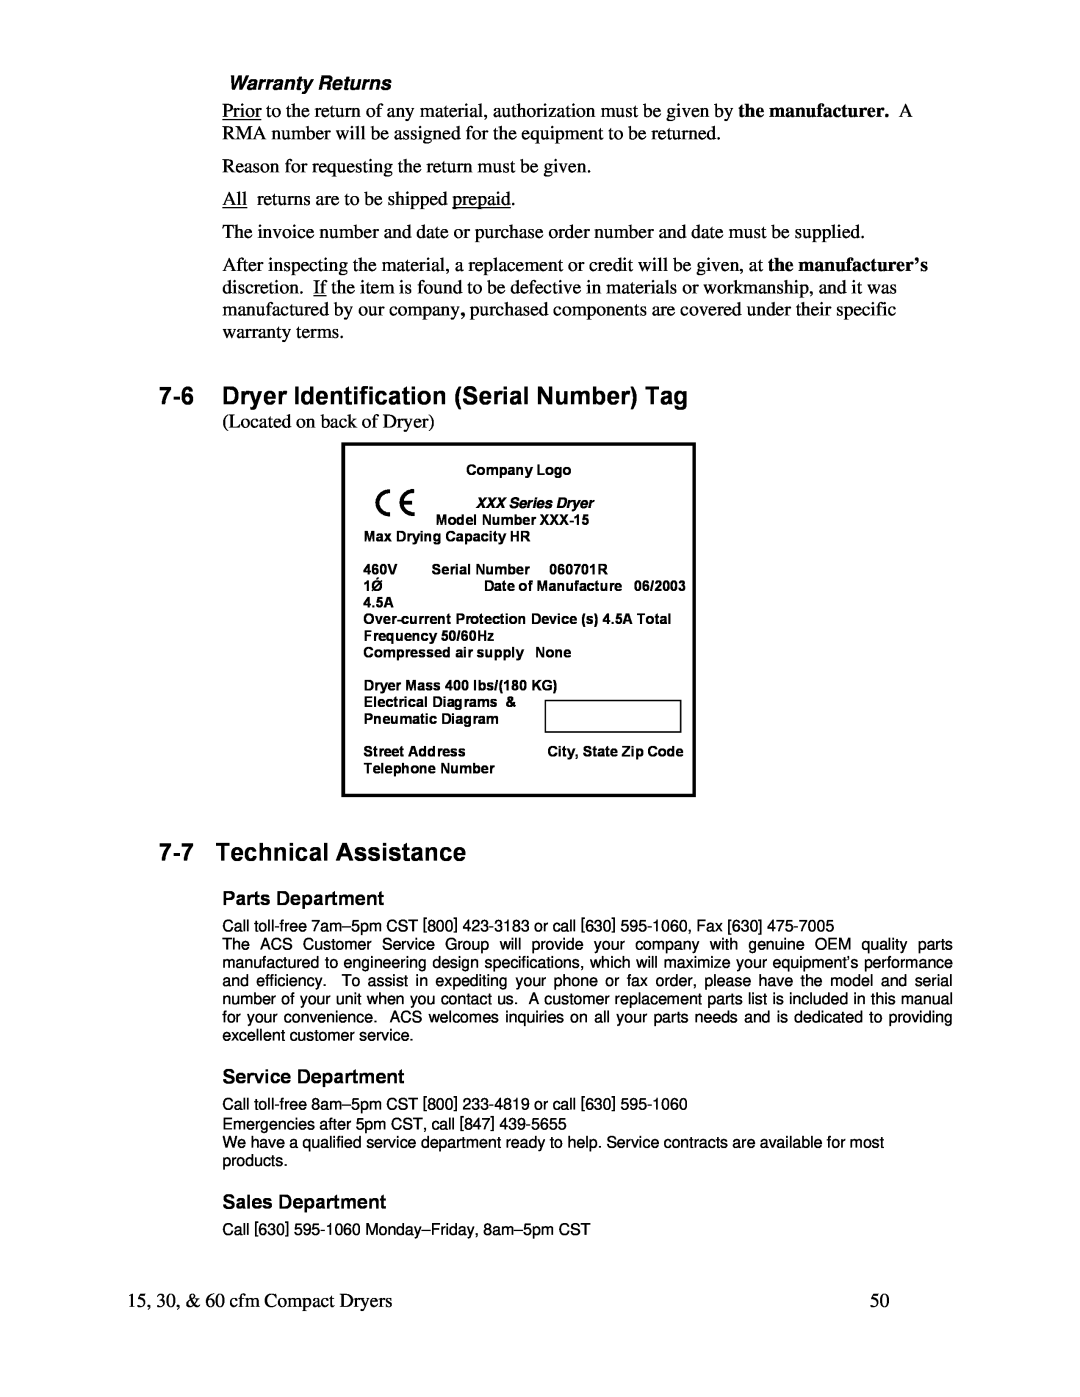 Sterling SDA Series 25-100 7-6Dryer Identification Serial Number Tag, 7-7Technical Assistance, Warranty Returns 